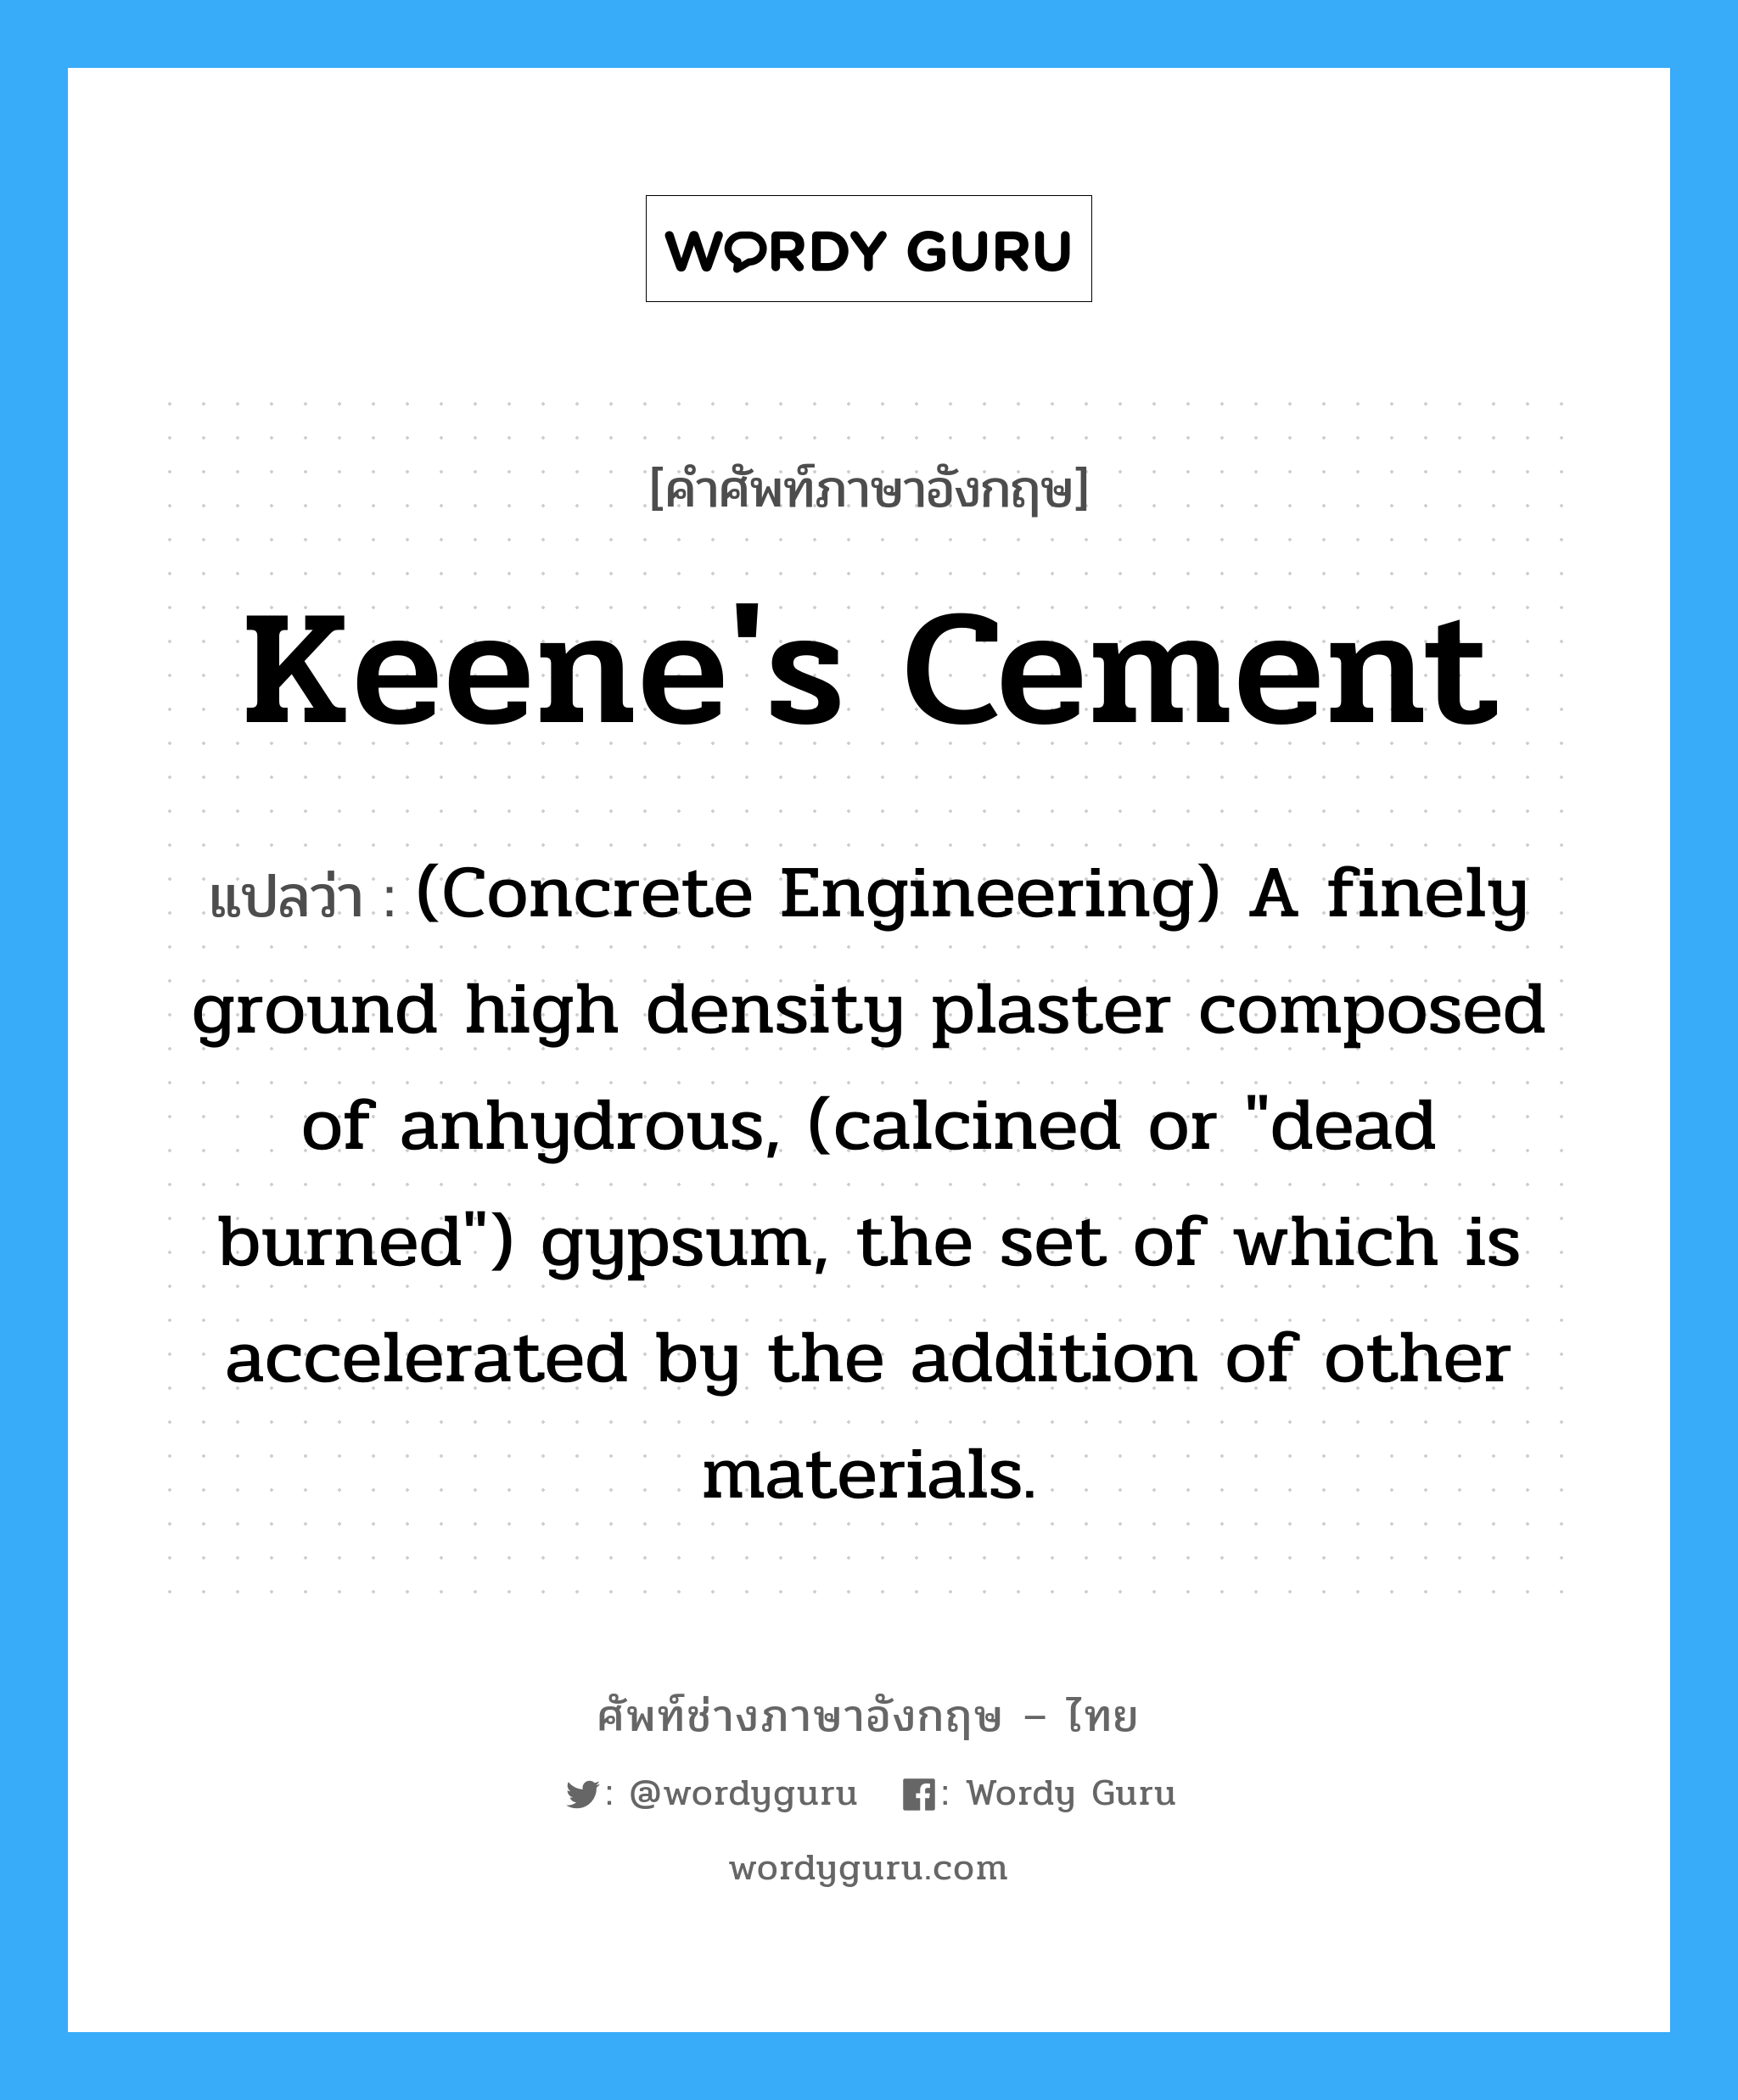 (Concrete Engineering) A finely ground high density plaster composed of anhydrous, (calcined or "dead burned") gypsum, the set of which is accelerated by the addition of other materials. ภาษาอังกฤษ?, คำศัพท์ช่างภาษาอังกฤษ - ไทย (Concrete Engineering) A finely ground high density plaster composed of anhydrous, (calcined or "dead burned") gypsum, the set of which is accelerated by the addition of other materials. คำศัพท์ภาษาอังกฤษ (Concrete Engineering) A finely ground high density plaster composed of anhydrous, (calcined or "dead burned") gypsum, the set of which is accelerated by the addition of other materials. แปลว่า Keene's Cement